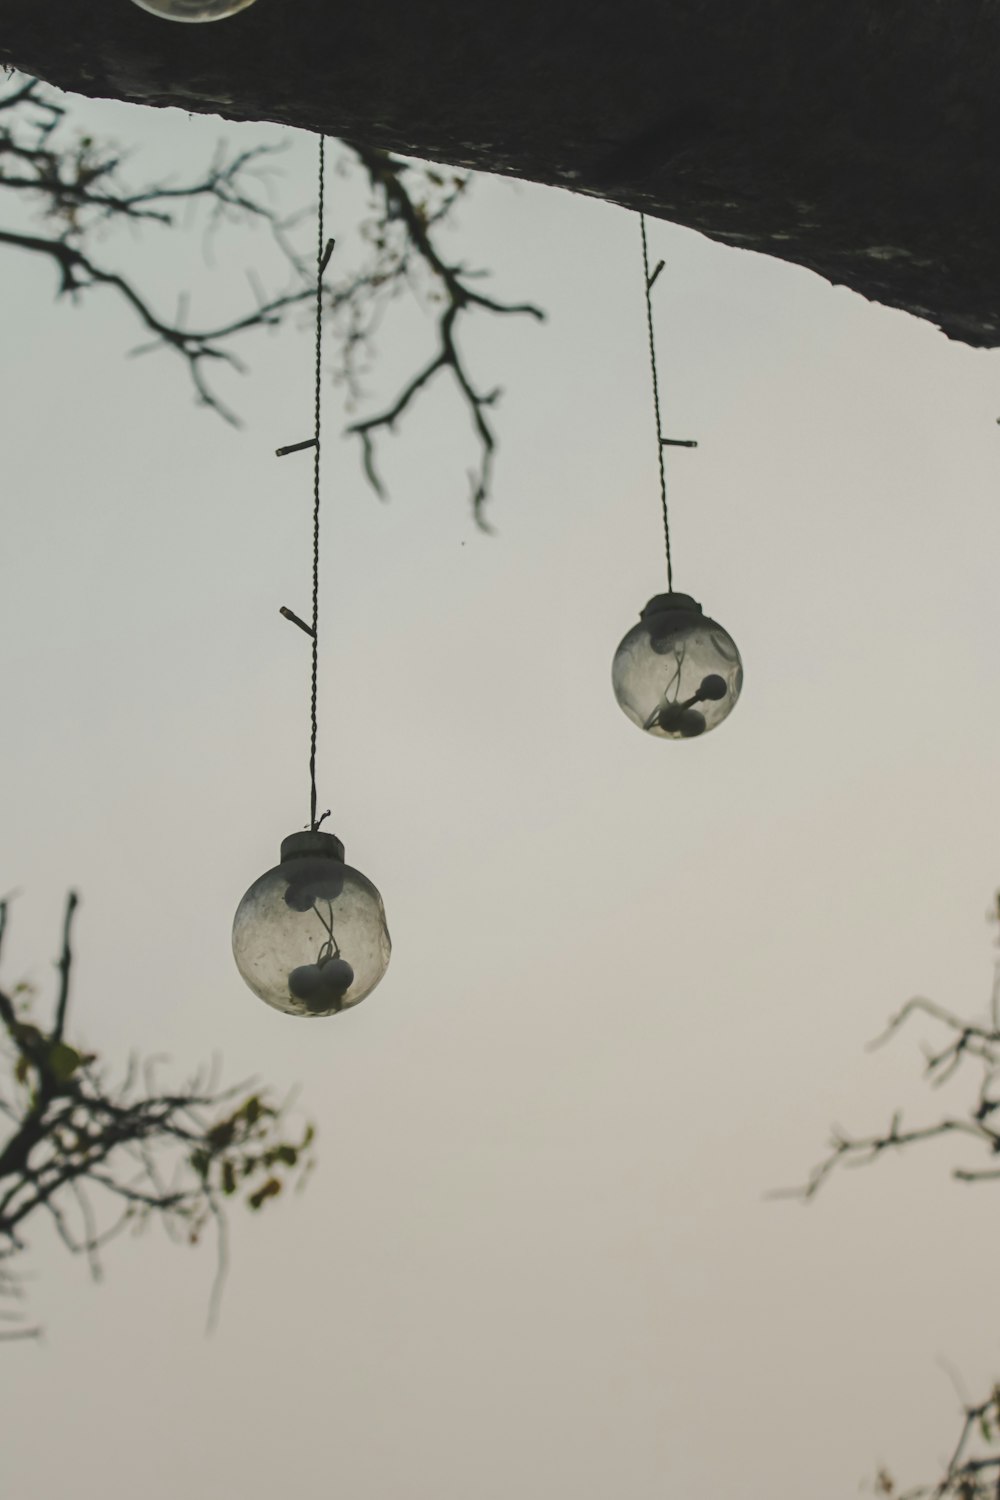 three glass balls hanging from a tree branch